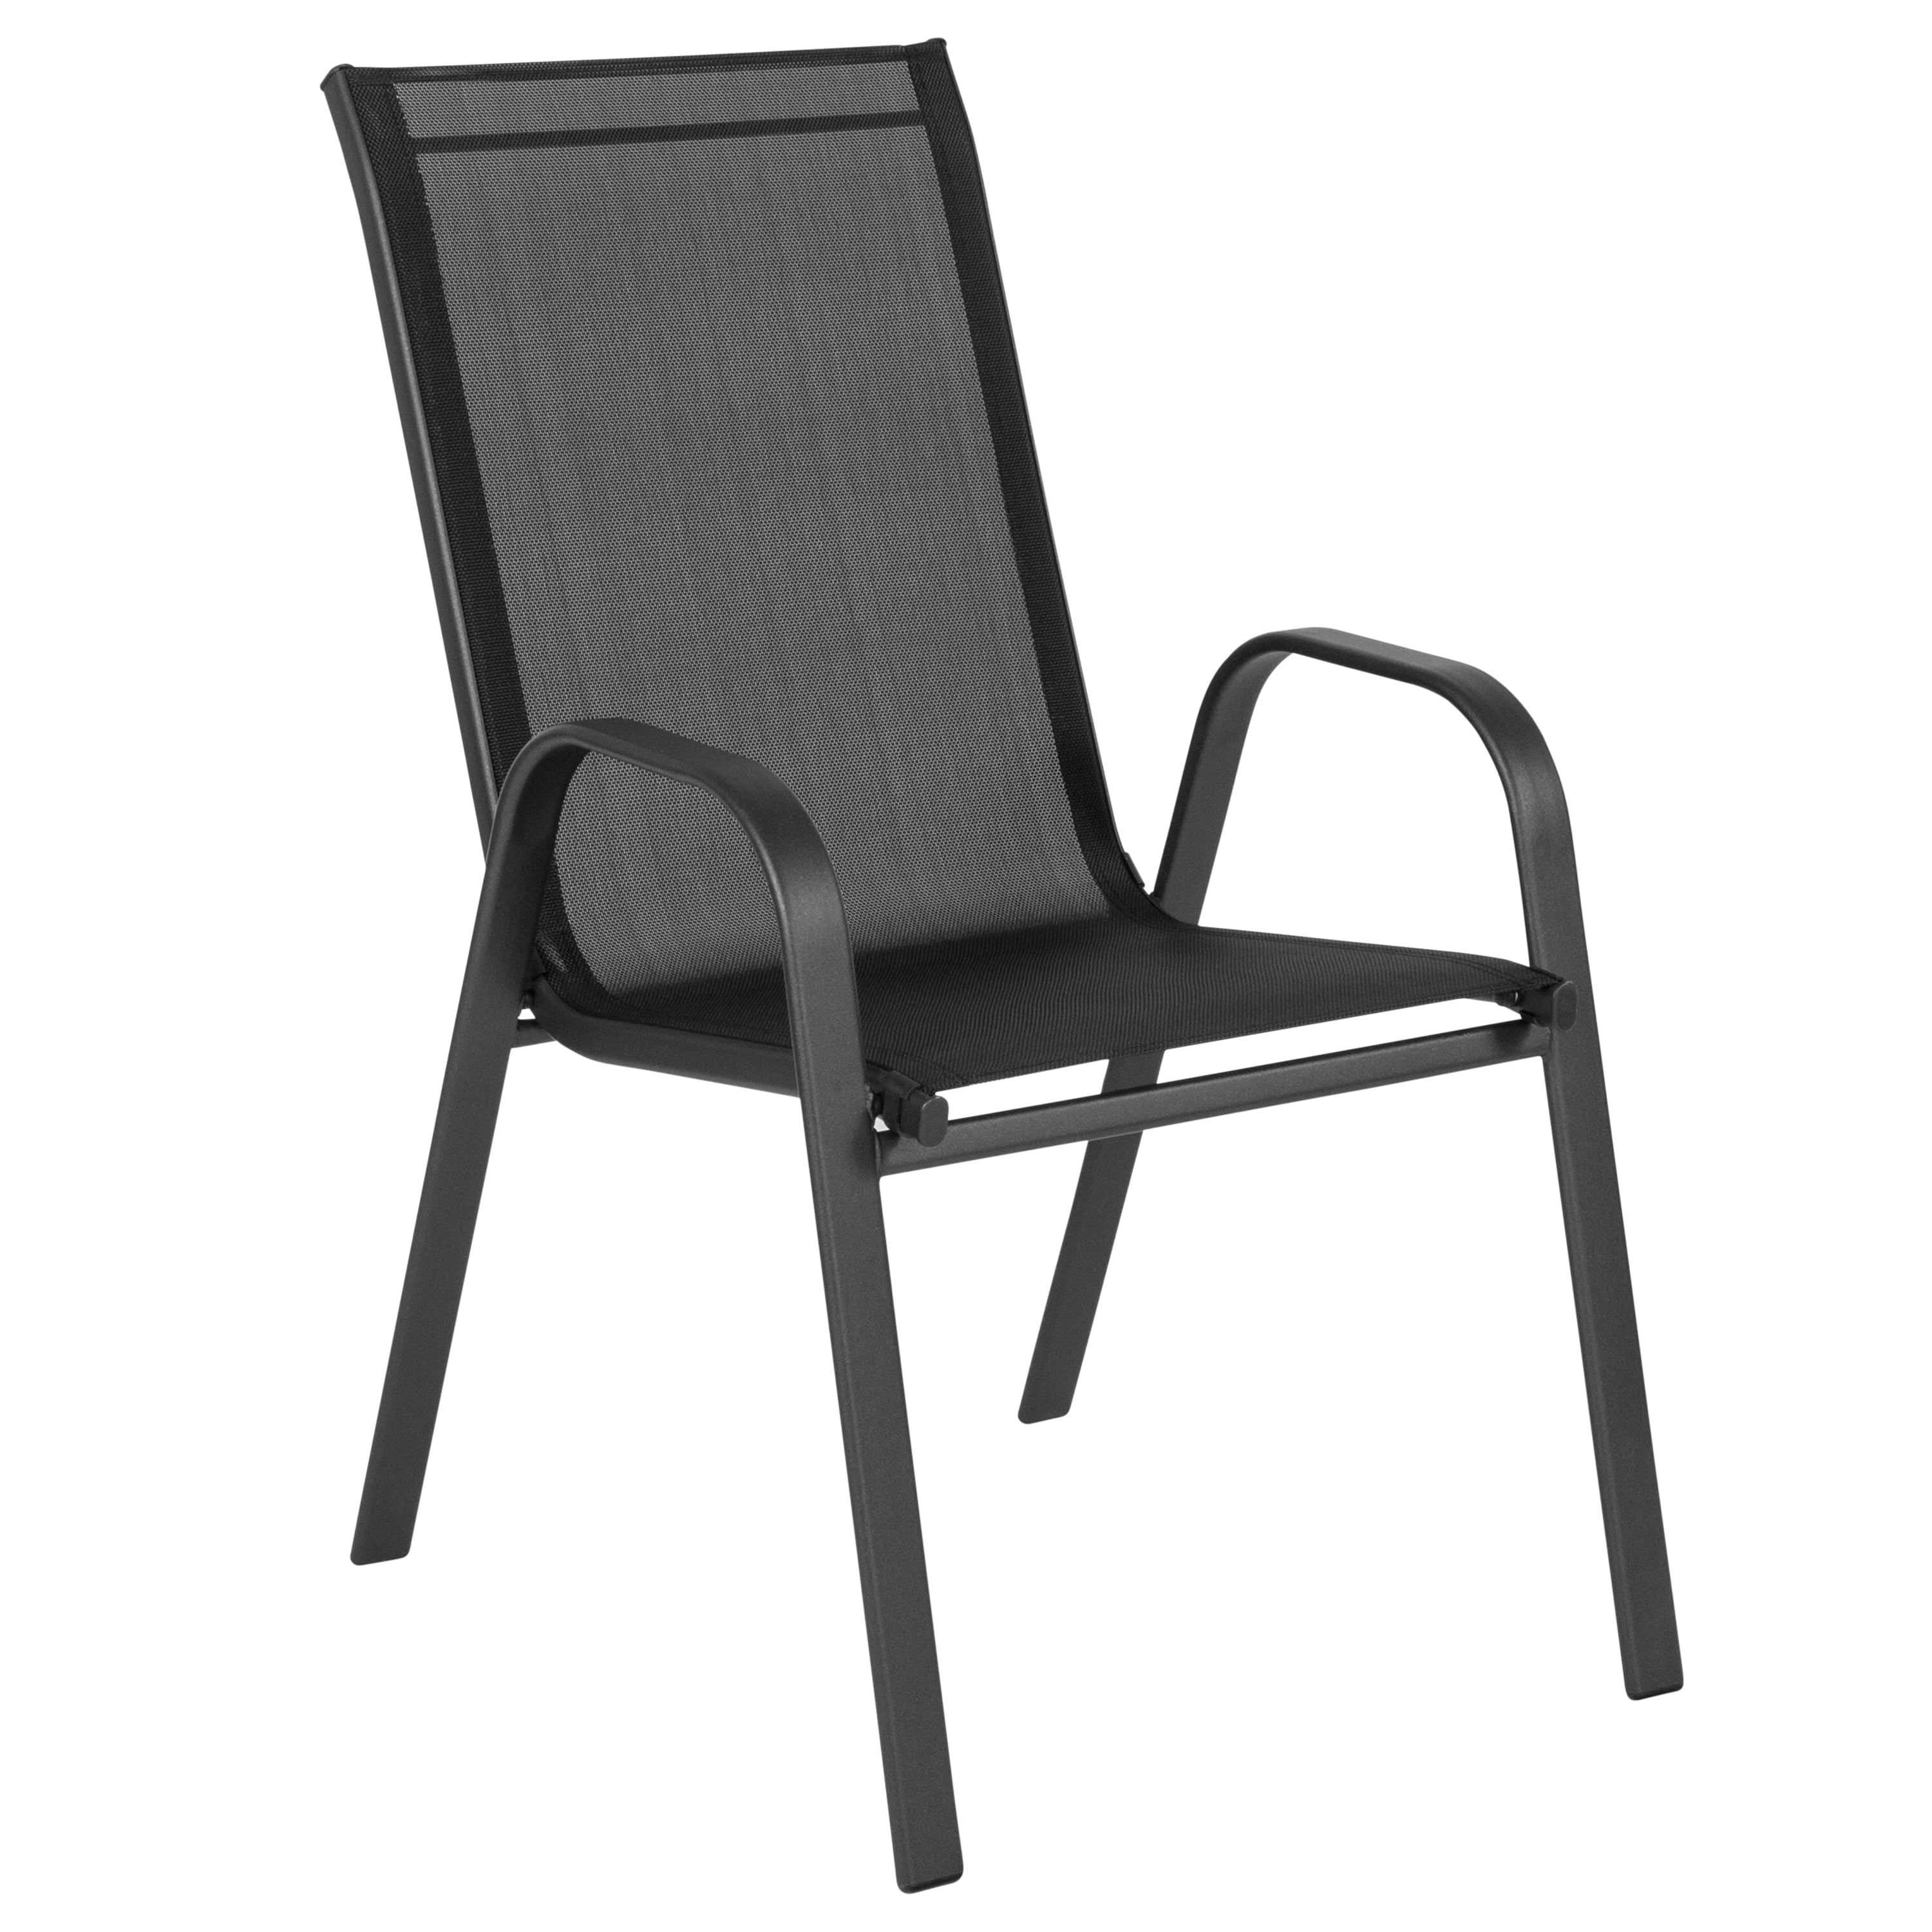 Flash Furniture Brazos Series Outdoor Stackable Patio Chairs for Adults, Set of 4, Black